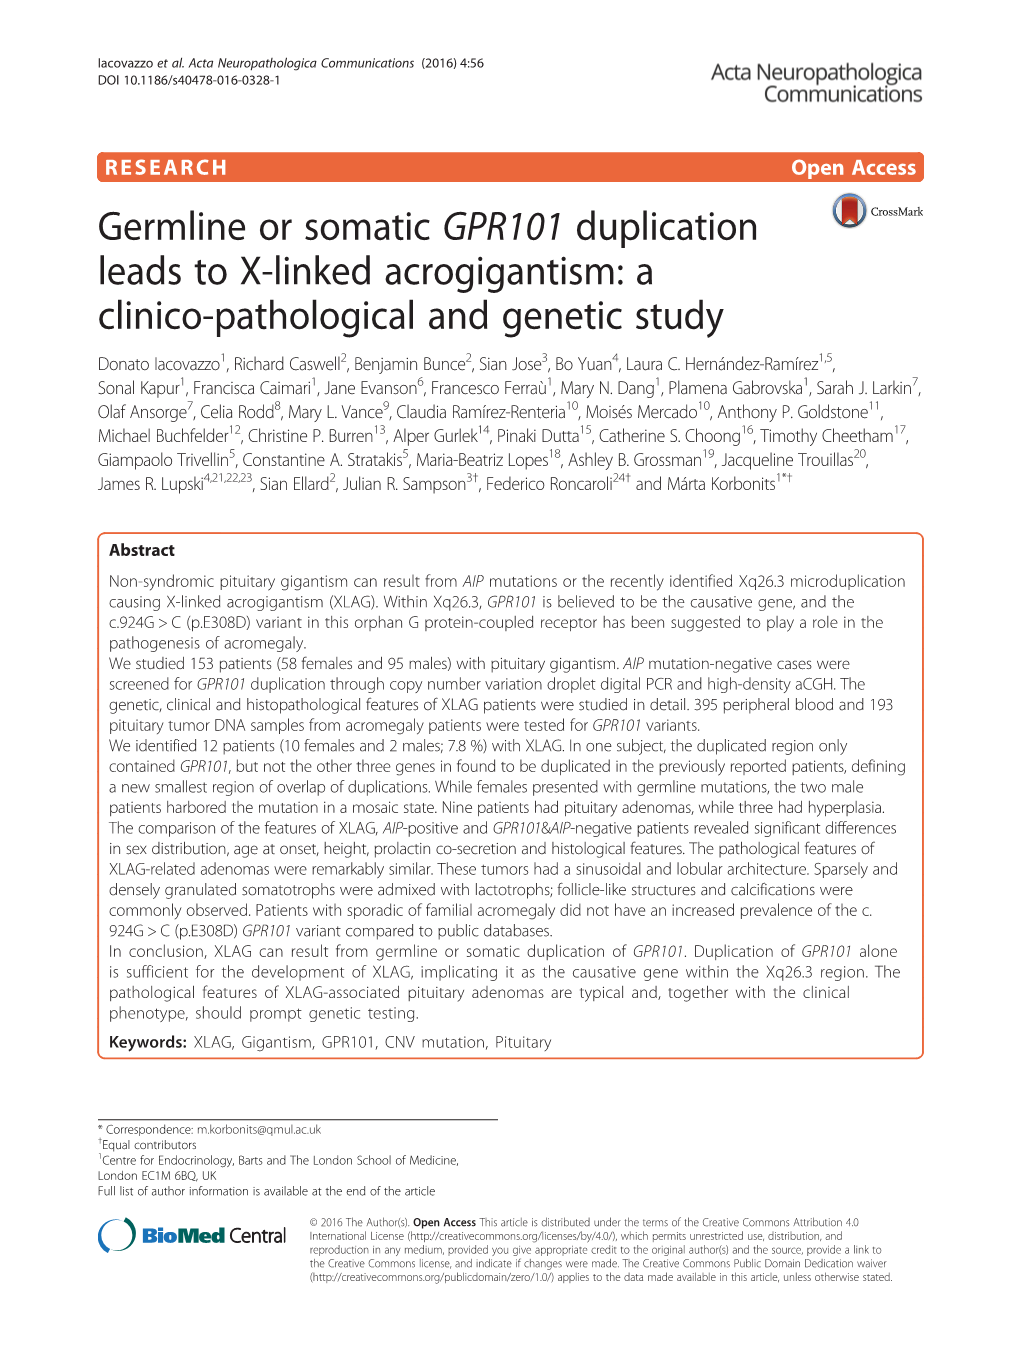 Germline Or Somatic GPR101 Duplication Leads to X-Linked Acrogigantism